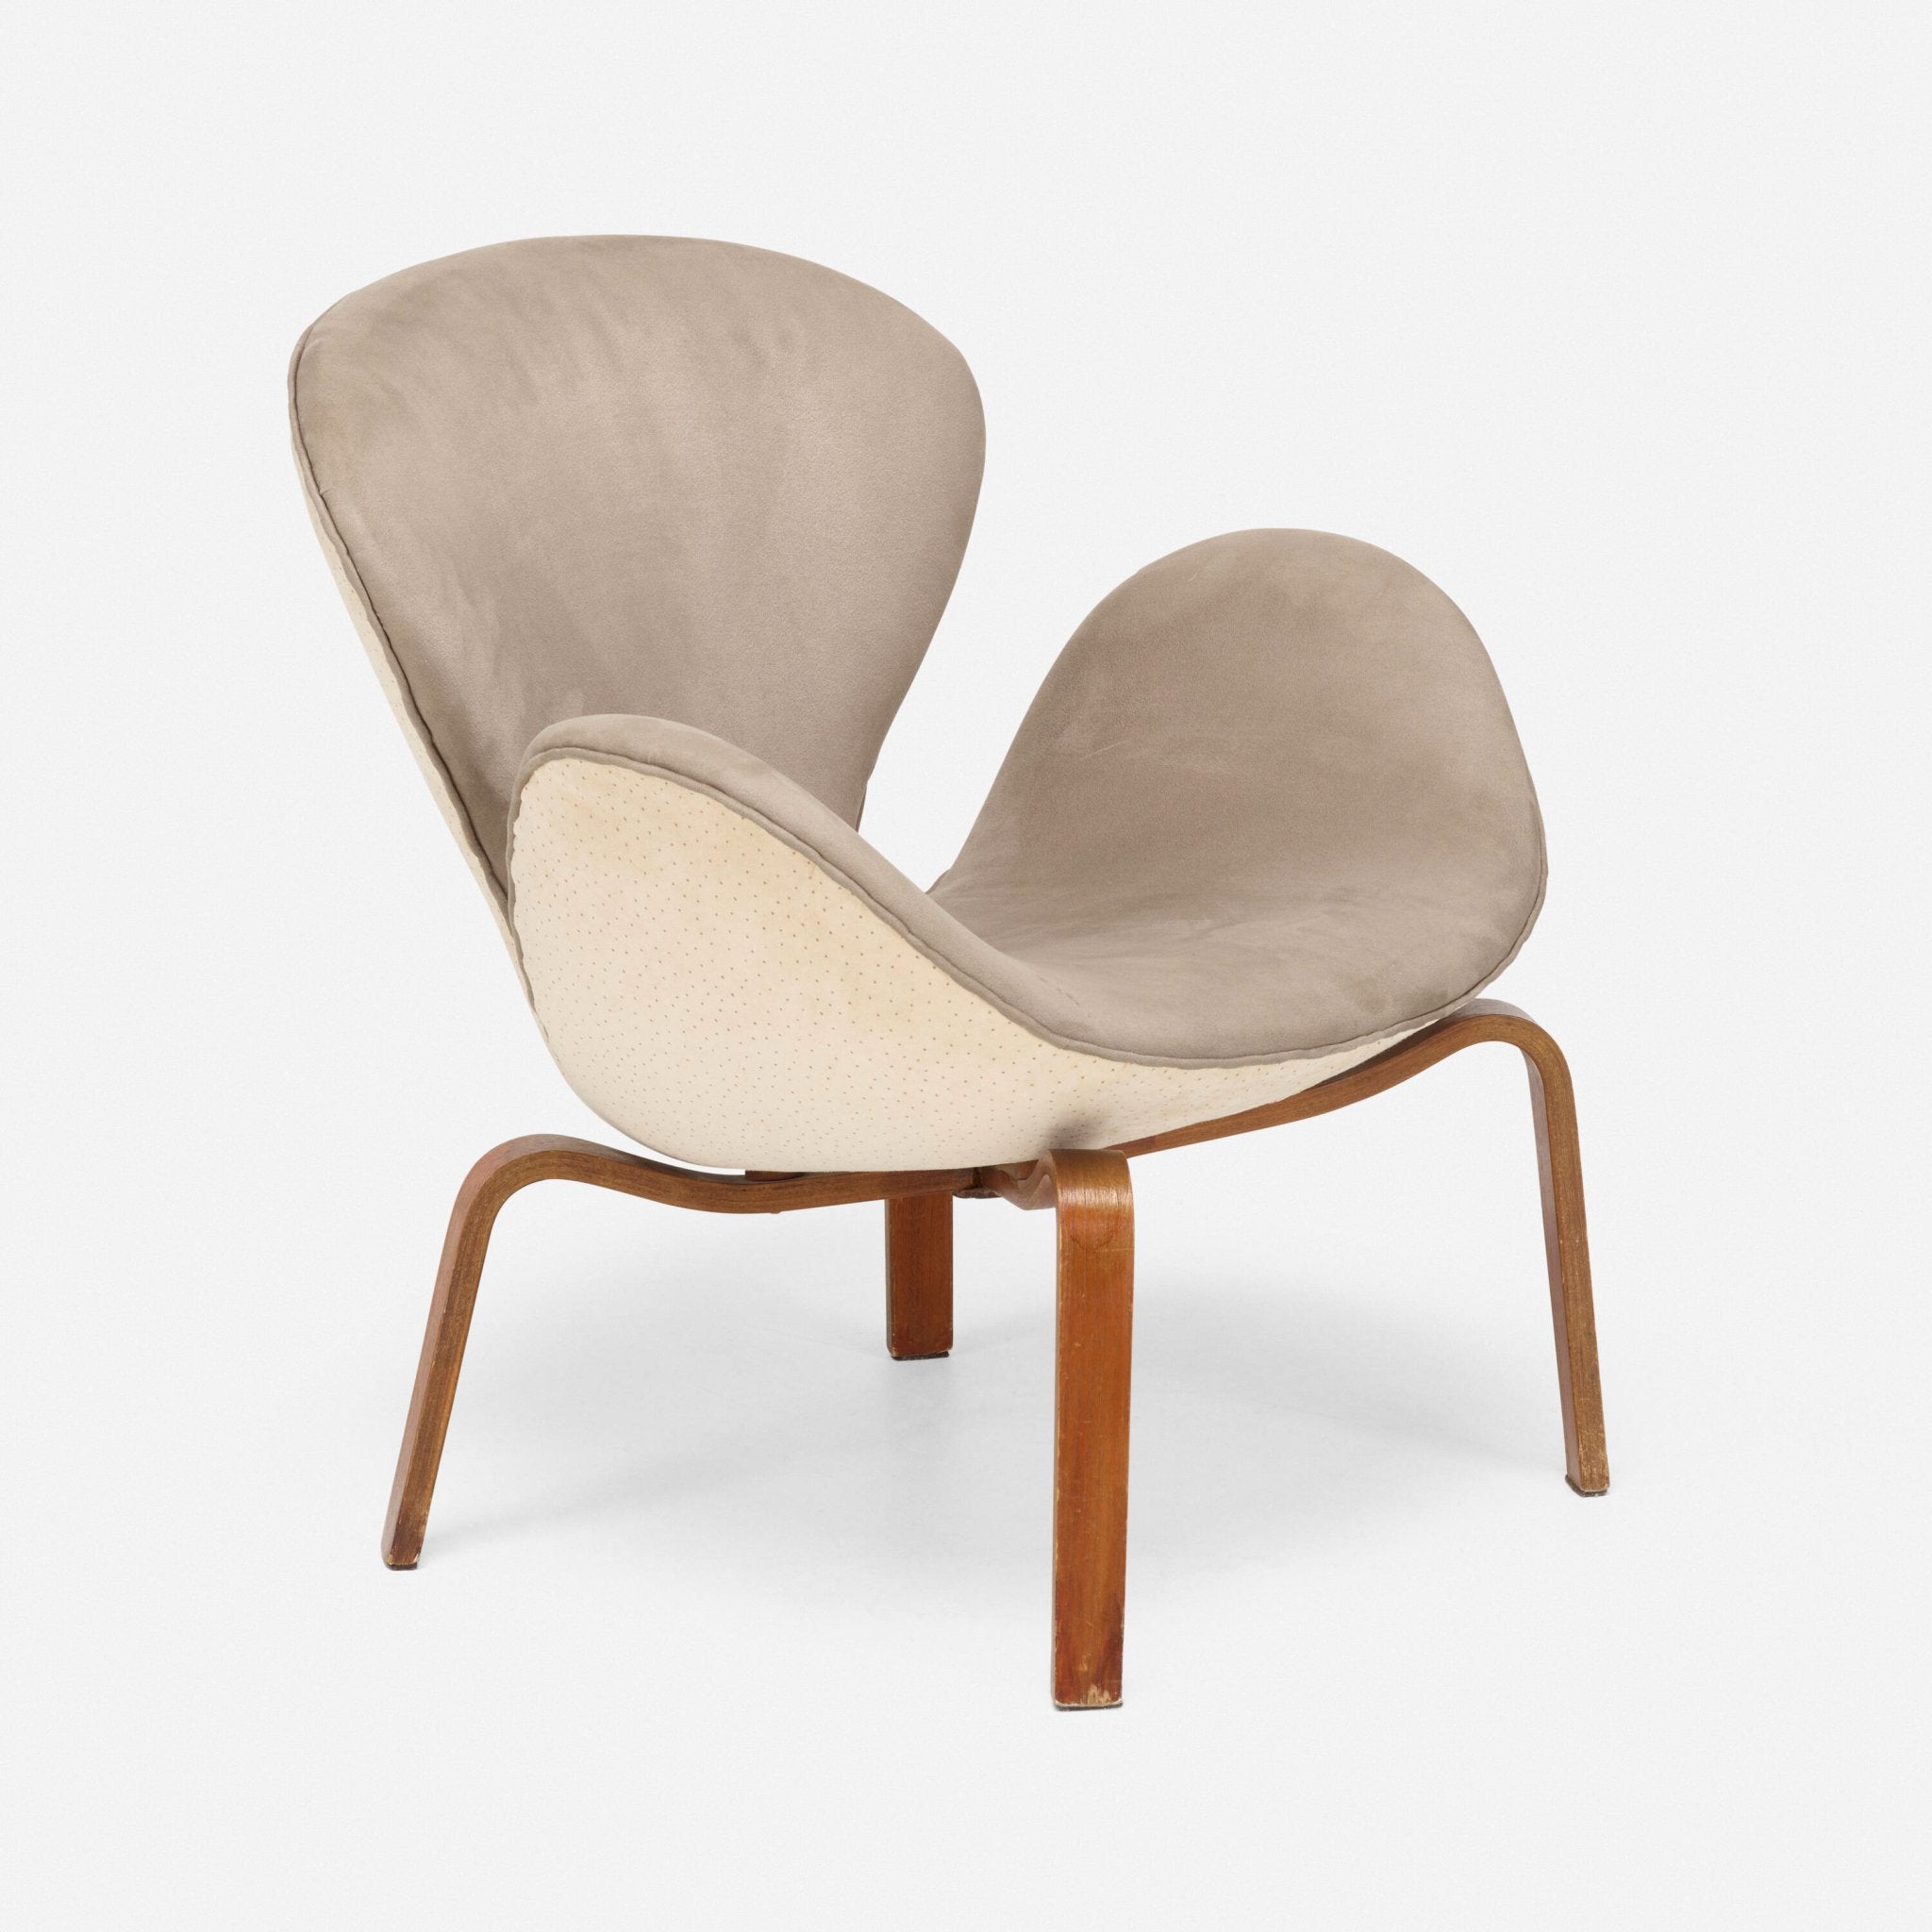 Early 'Swan' Chair Model No. 4325 by Arne Jacobson